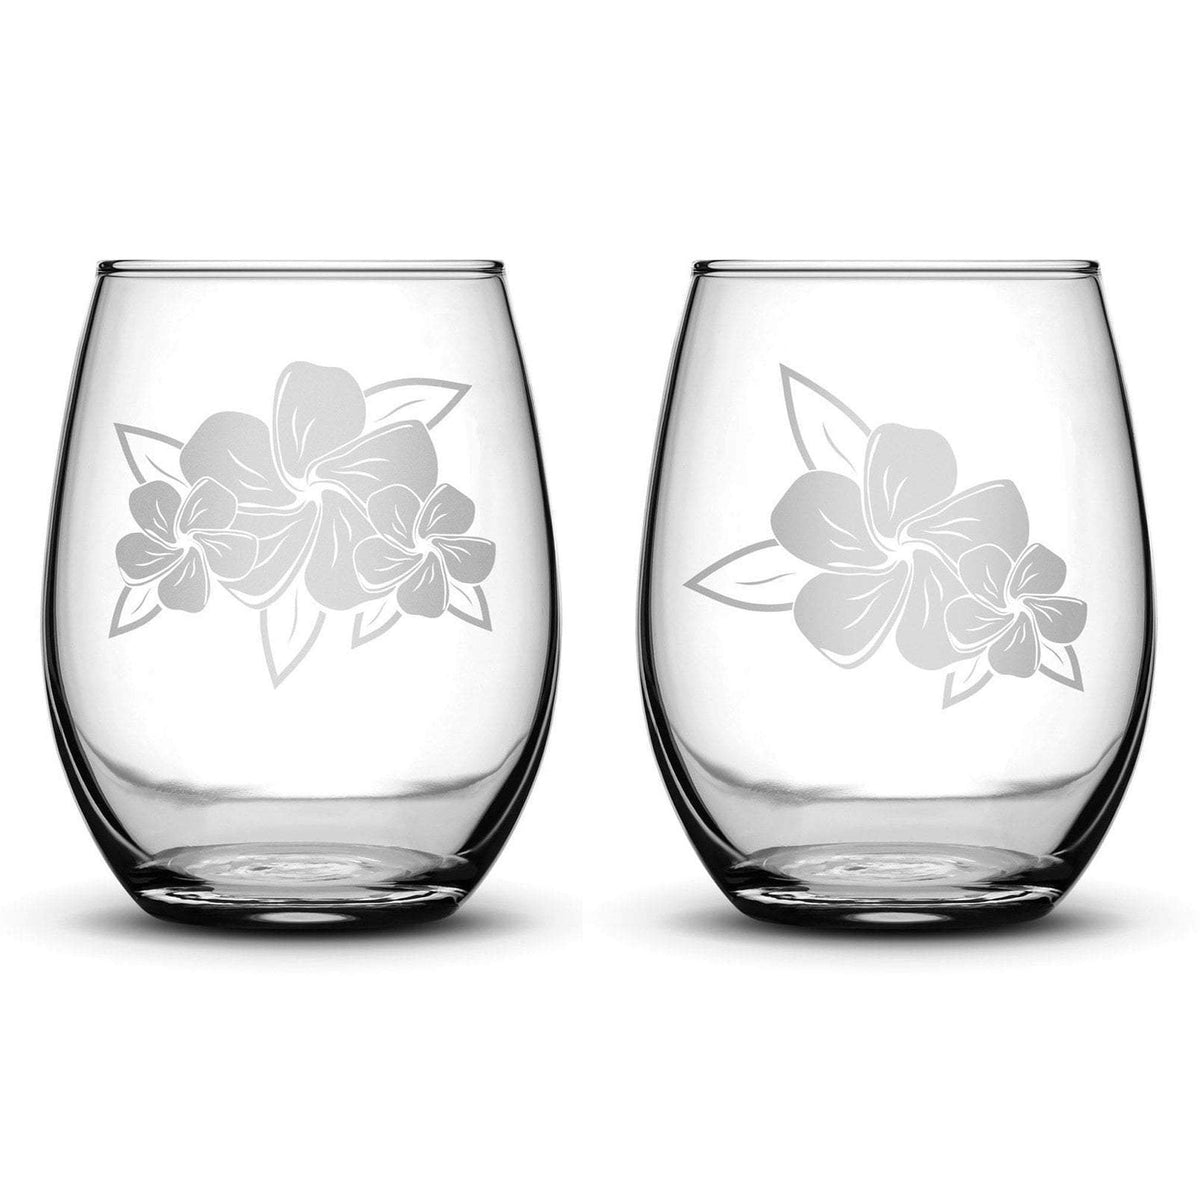 https://www.integritybottles.shop/wp-content/uploads/1691/93/we-offer-the-possibilities-of-discontinued-premium-wine-glasses-plumerias-with-leaves-15oz-set-of-2-integrity-bottles-for-reasonable-prices_0.jpg